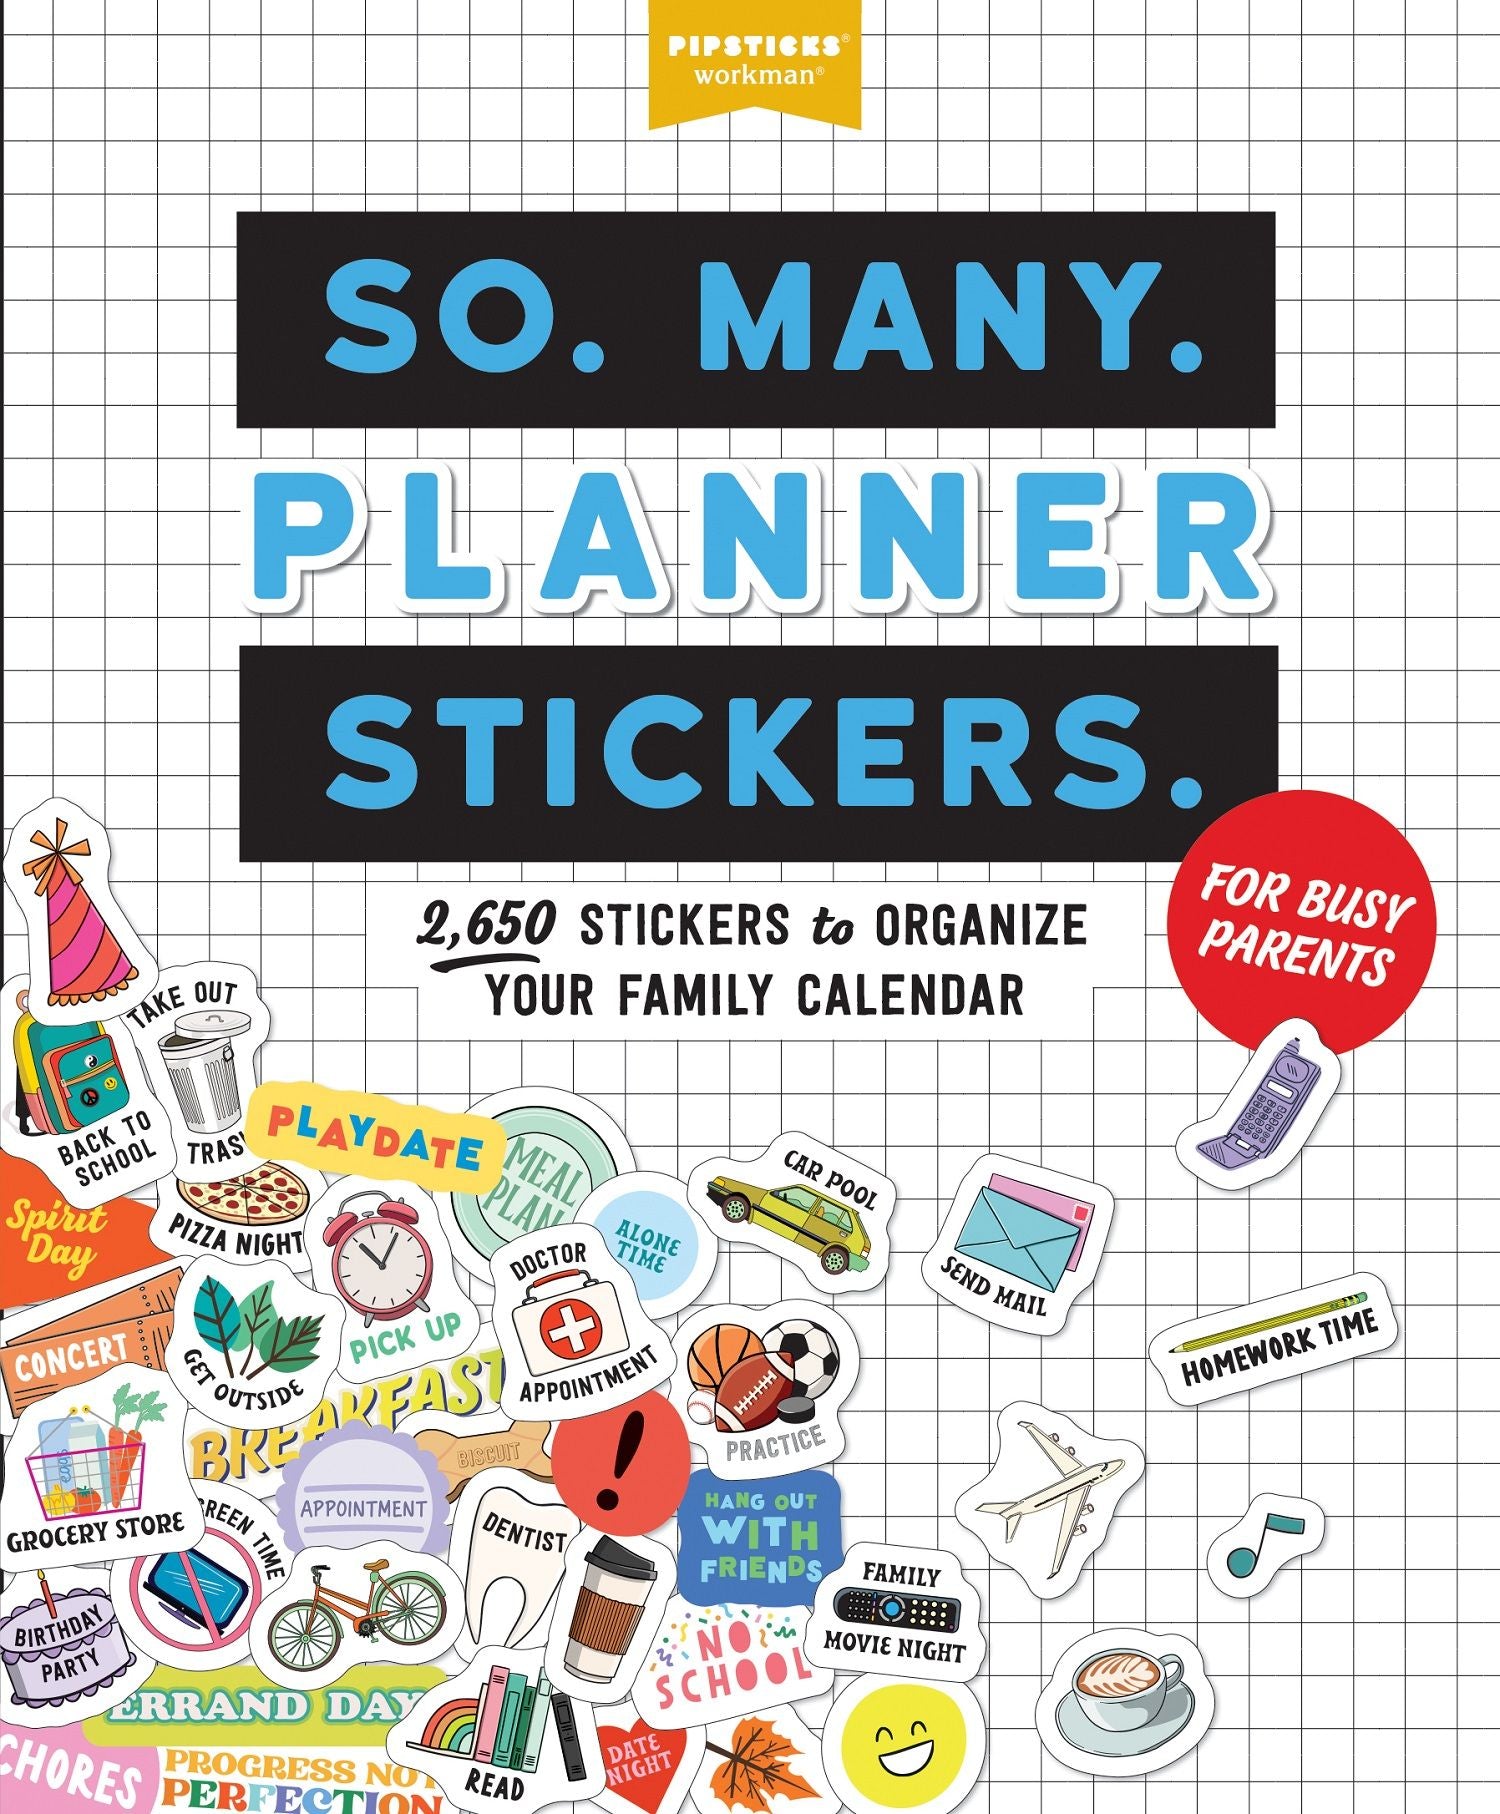 So. Many. Planner Stickers. For Busy Parents Book